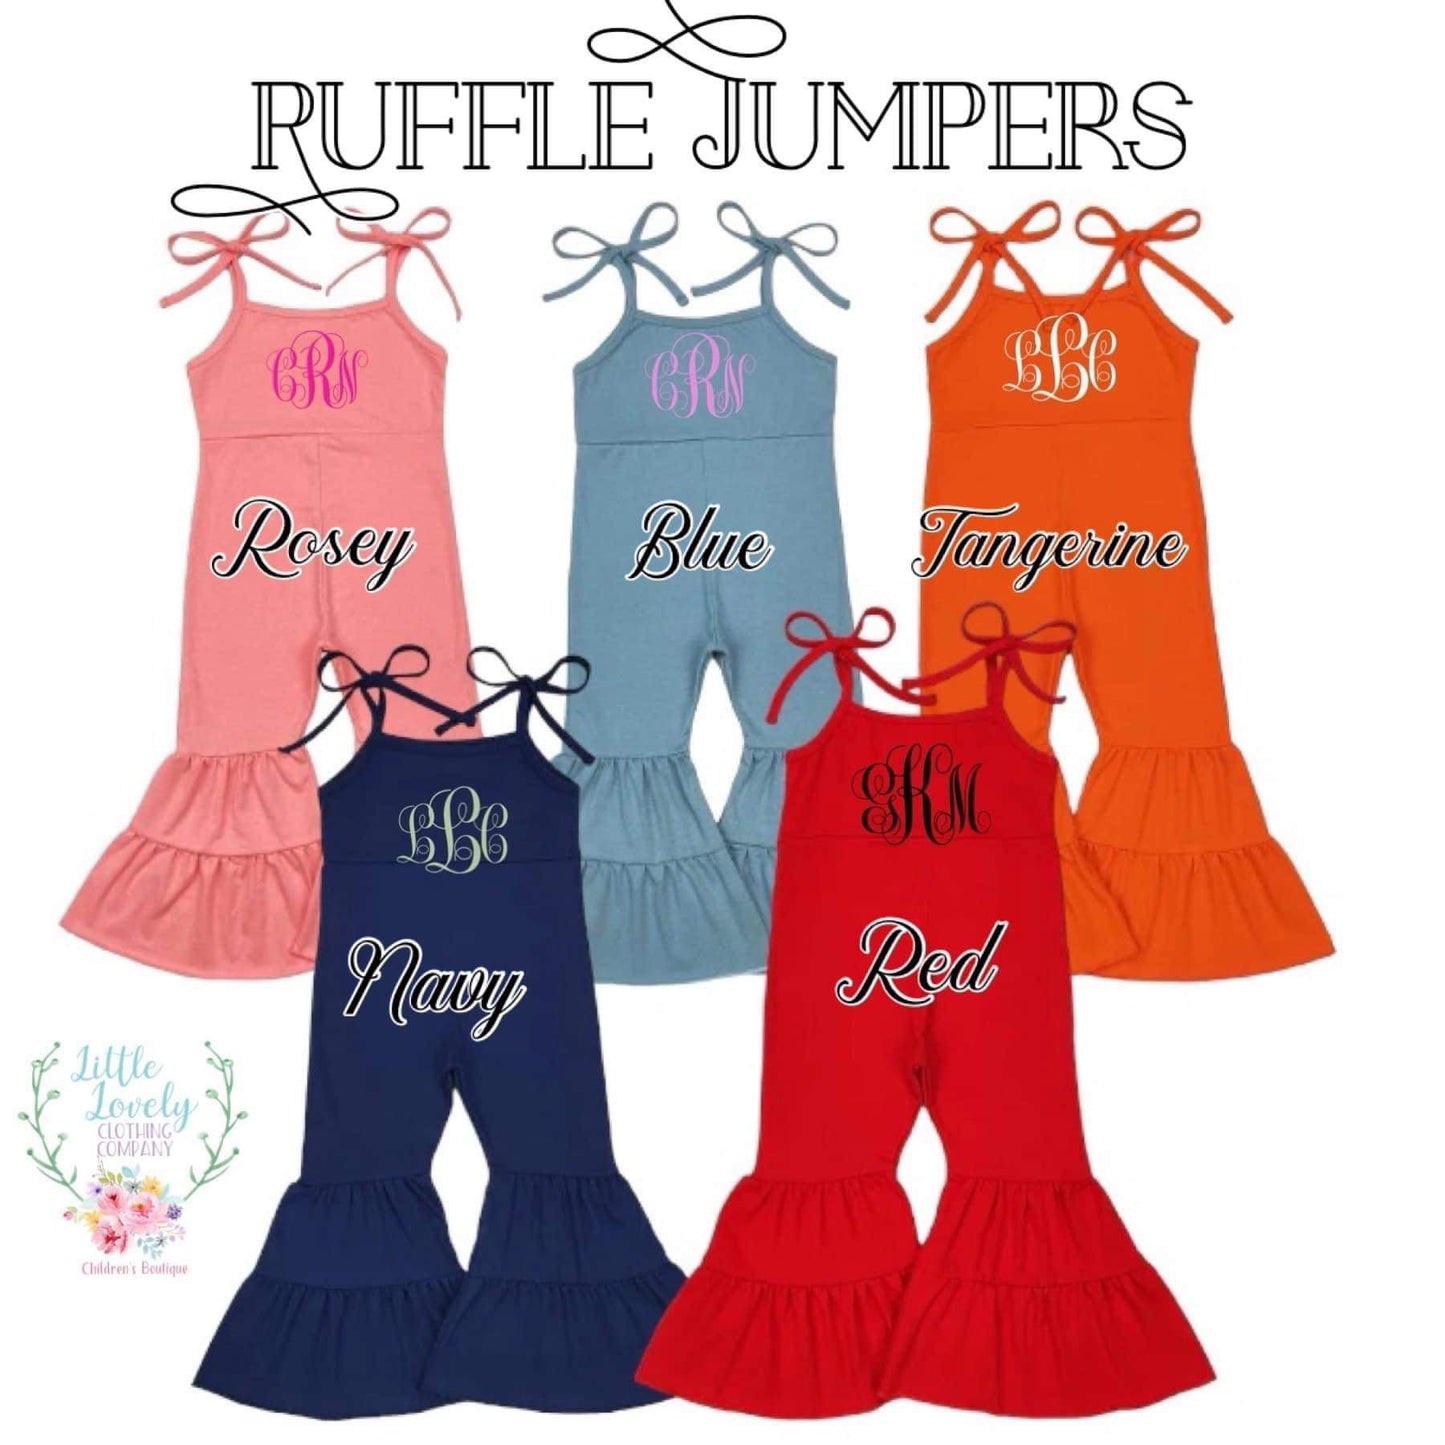 Ruffle Jumpers ETA to Ship to Customer  Feb, allow an addtl 1-2 weeks for personalization